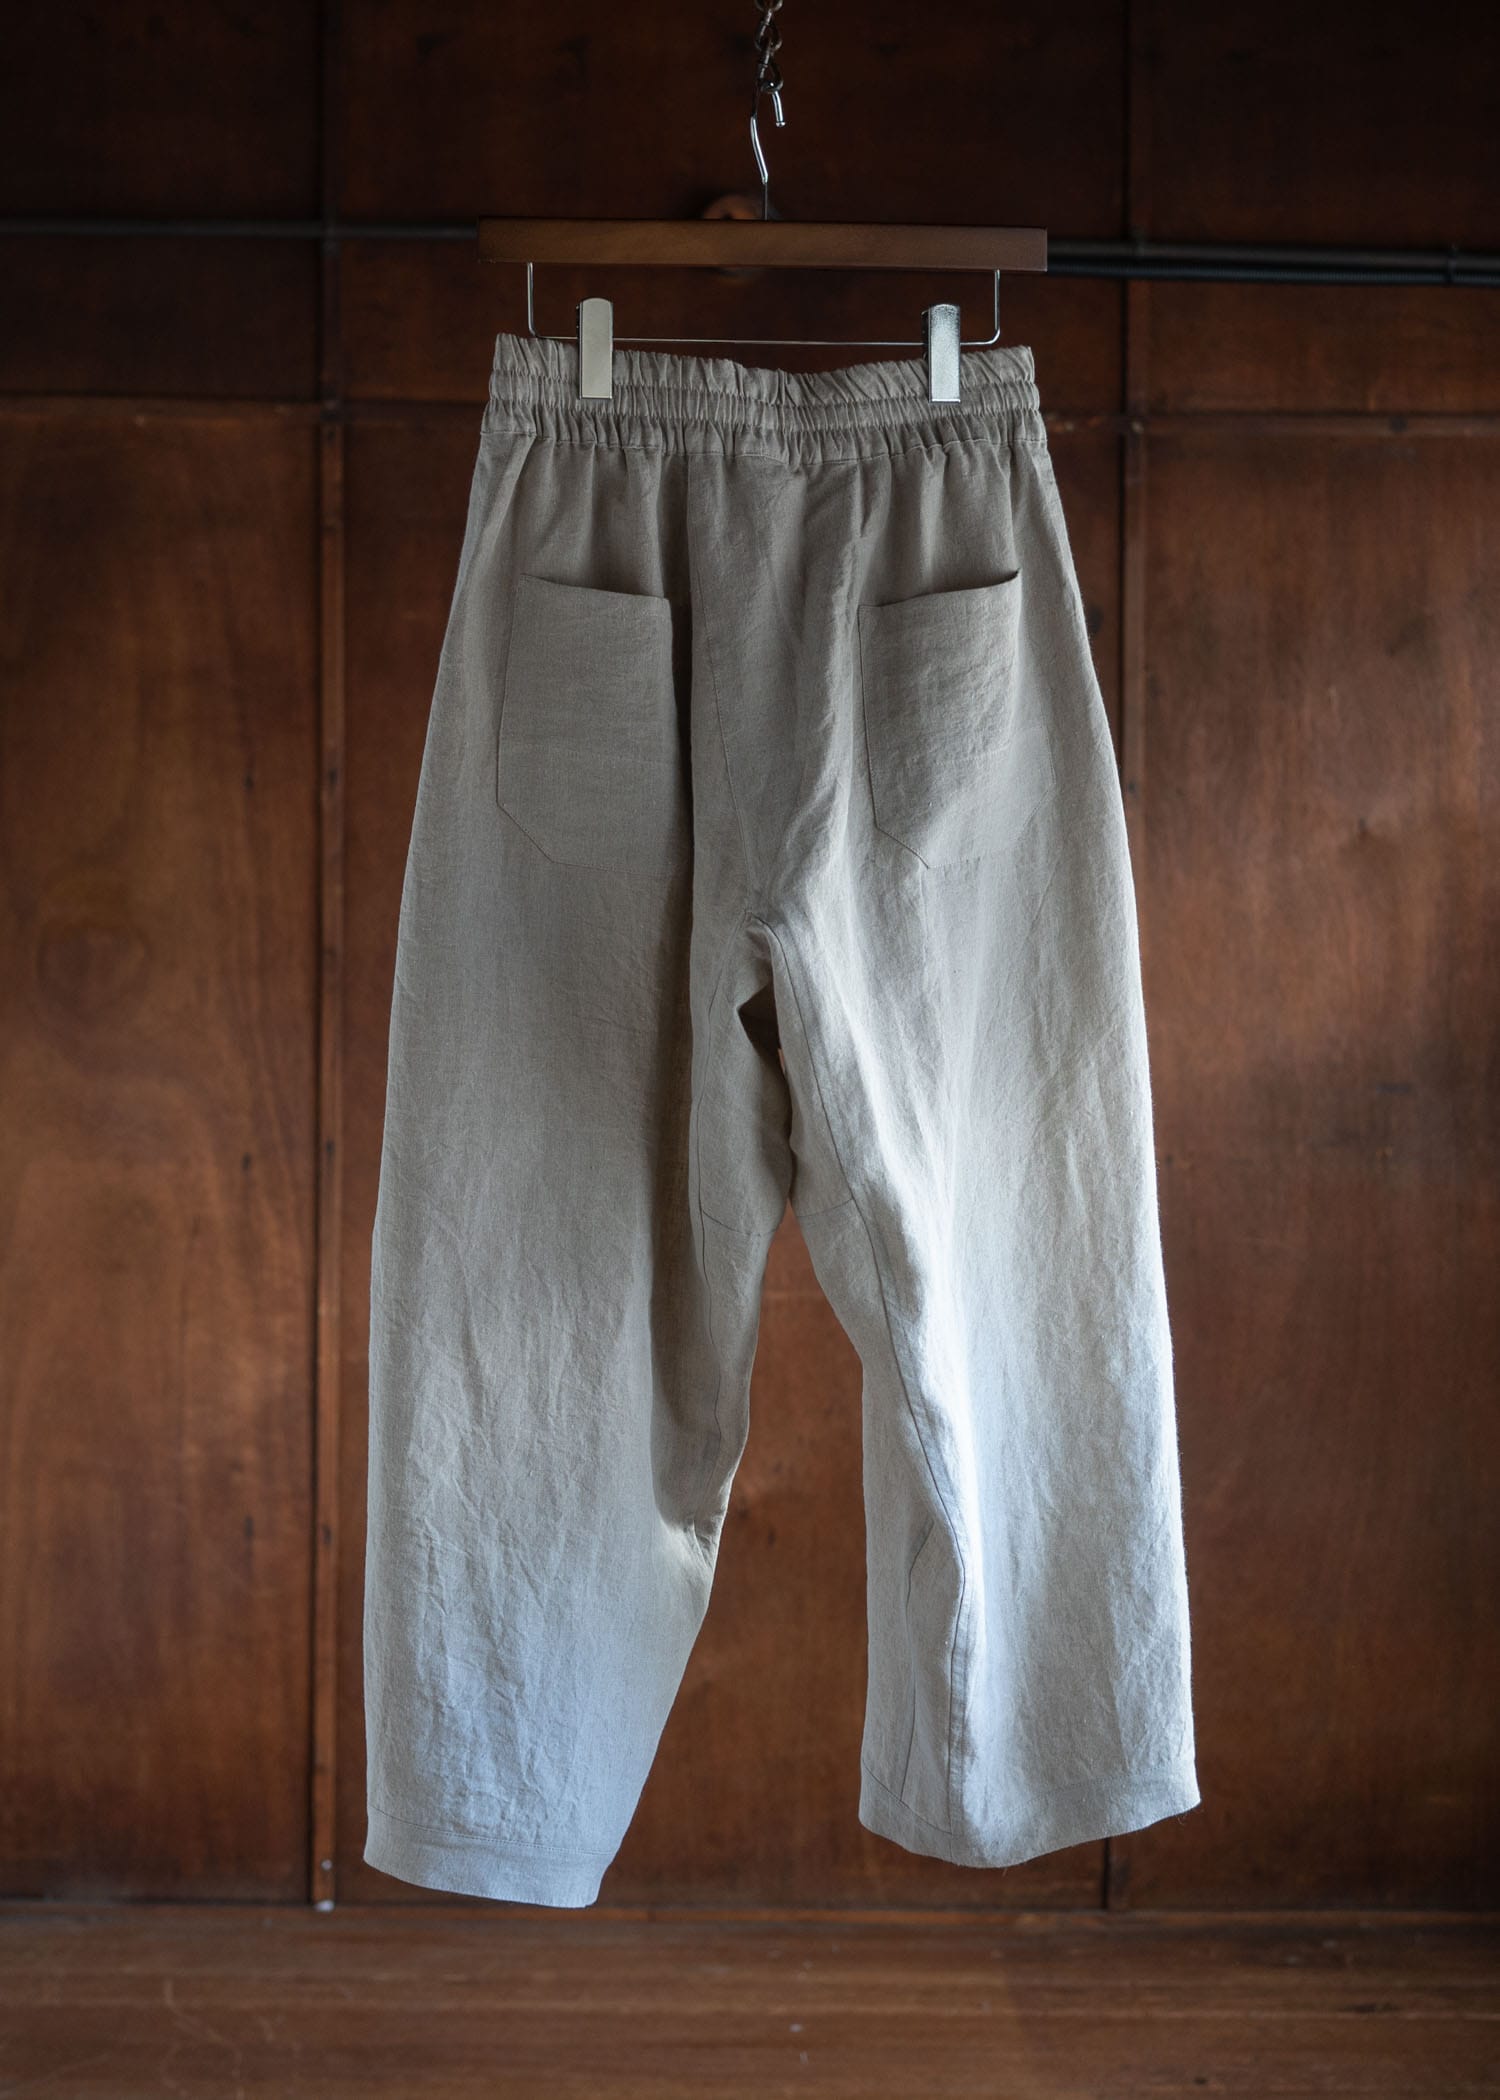 JAN-JAN VAN ESSCHE TROUSERS#80 LOOSE FIT LOW CROTCH TROUSERS WITH ELASTIC WAISTBAND HEMP CLOTH NATURAL